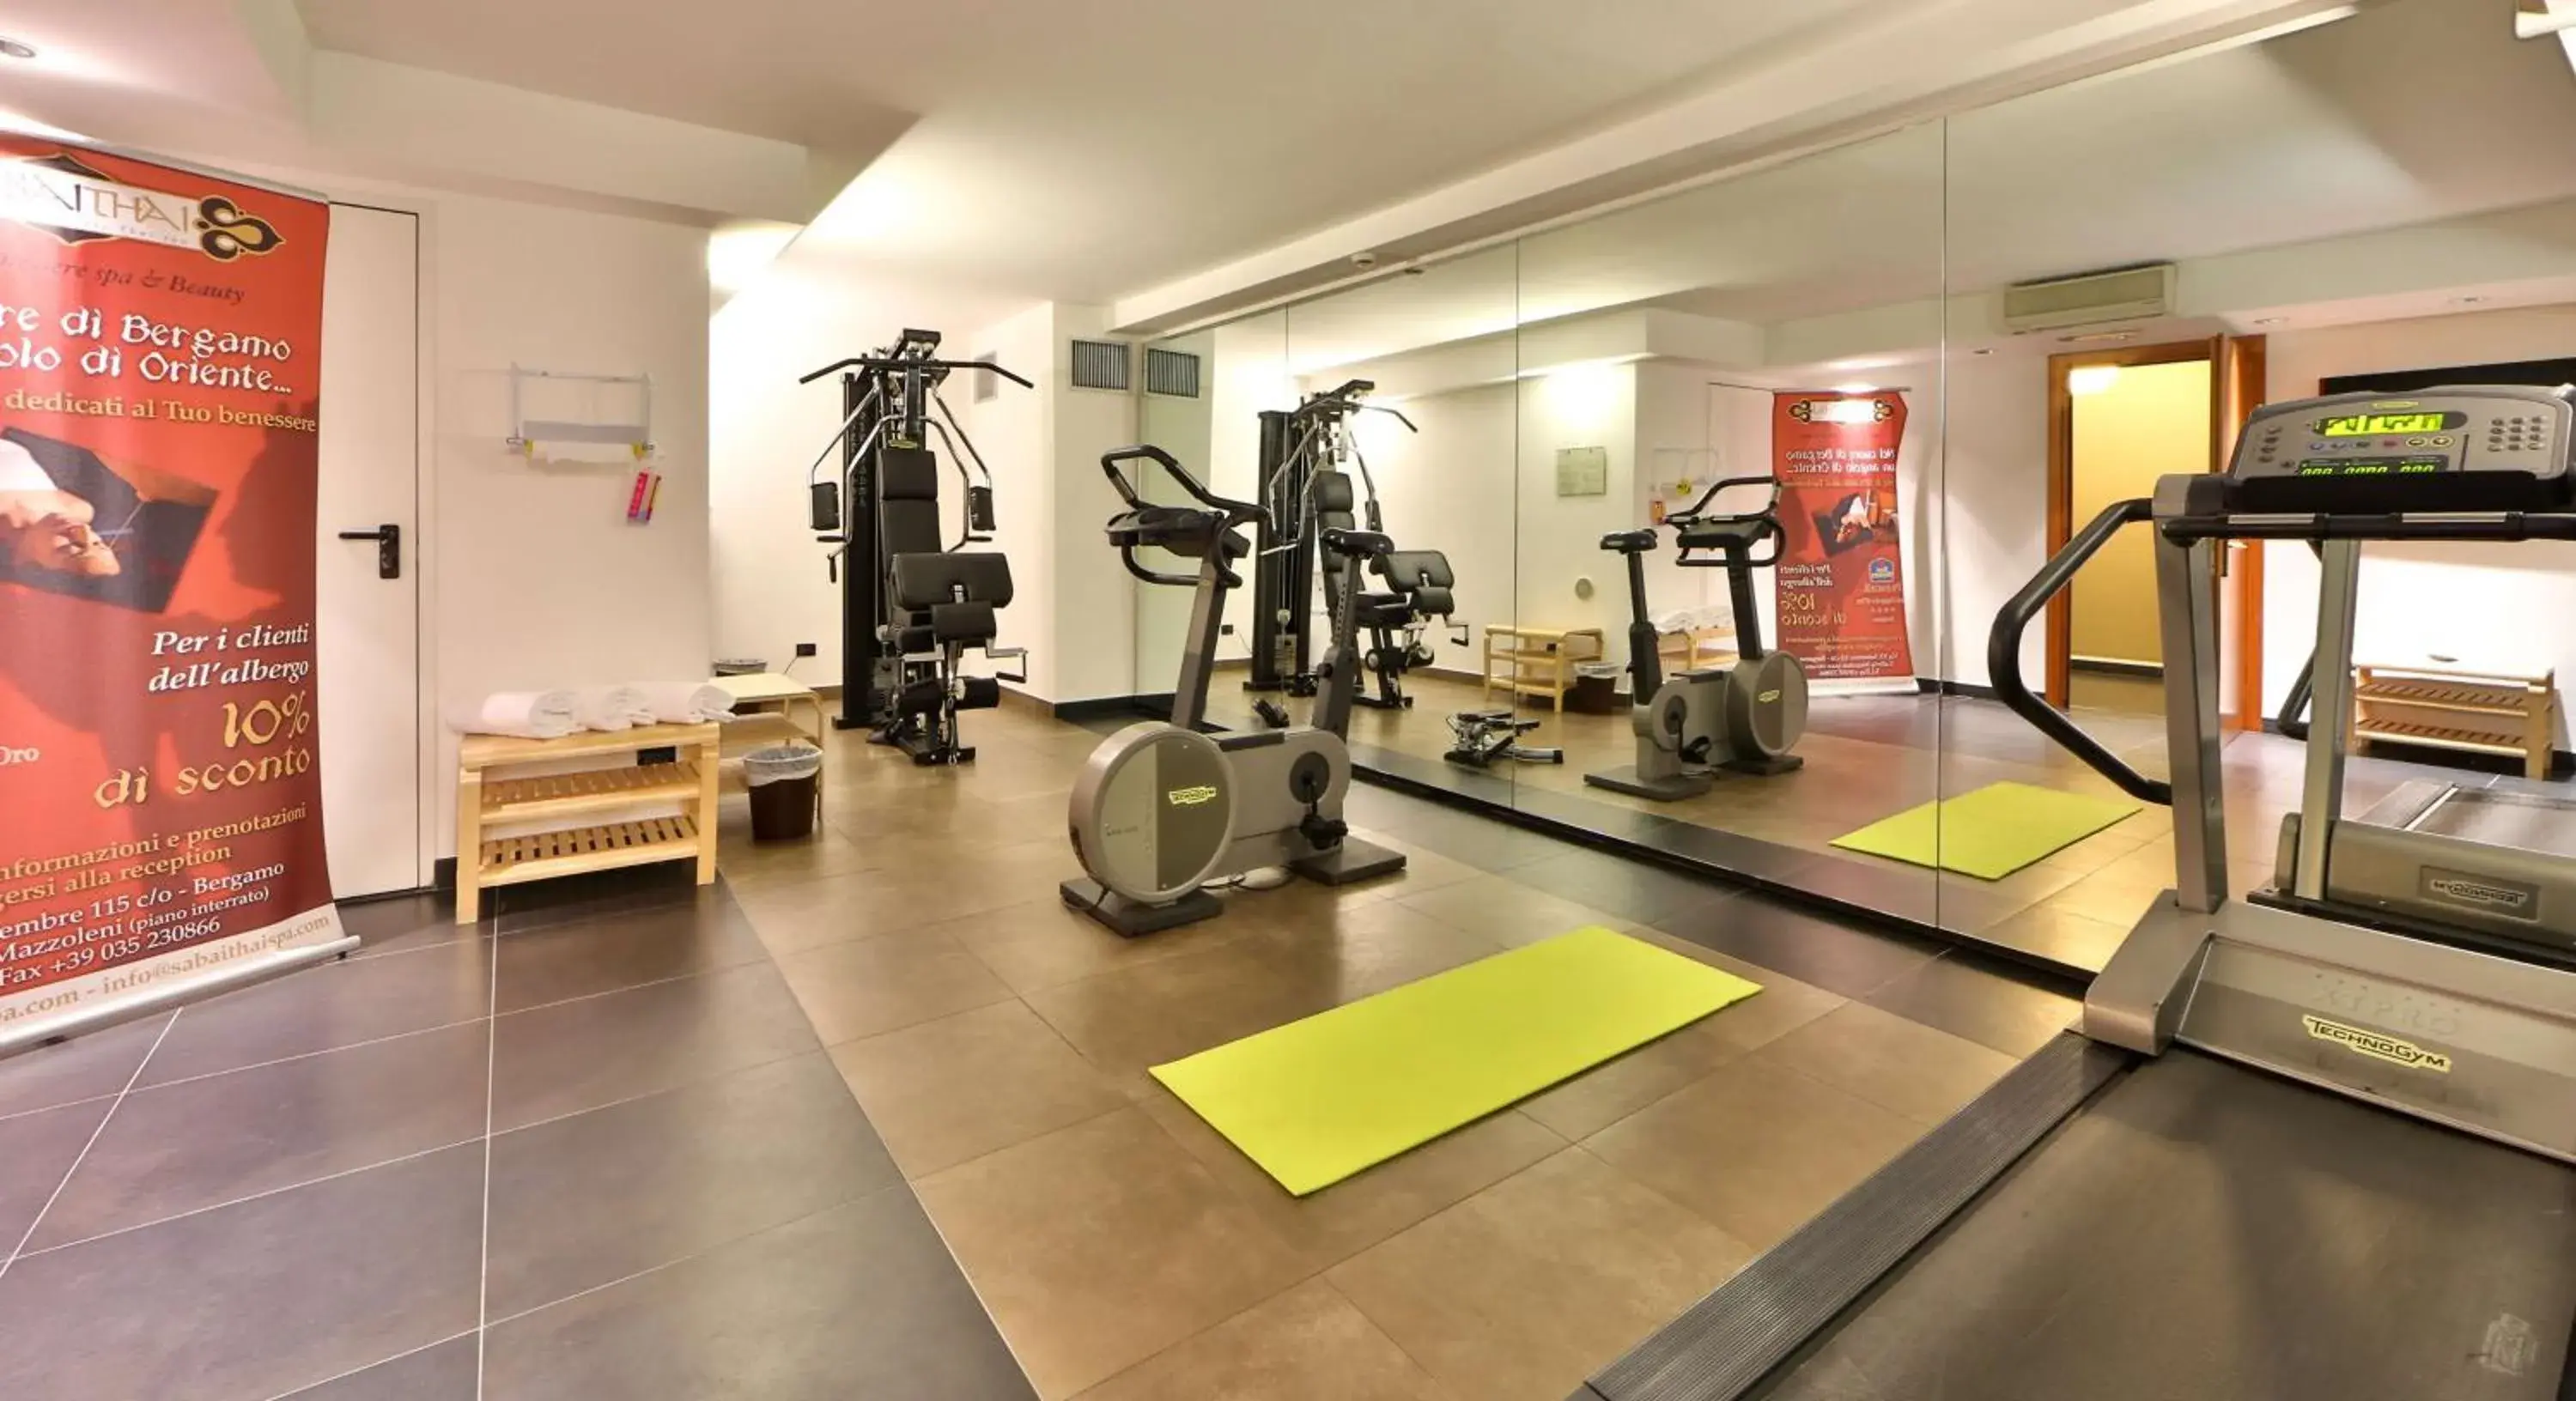 Fitness centre/facilities, Fitness Center/Facilities in Best Western Hotel Cappello d'Oro